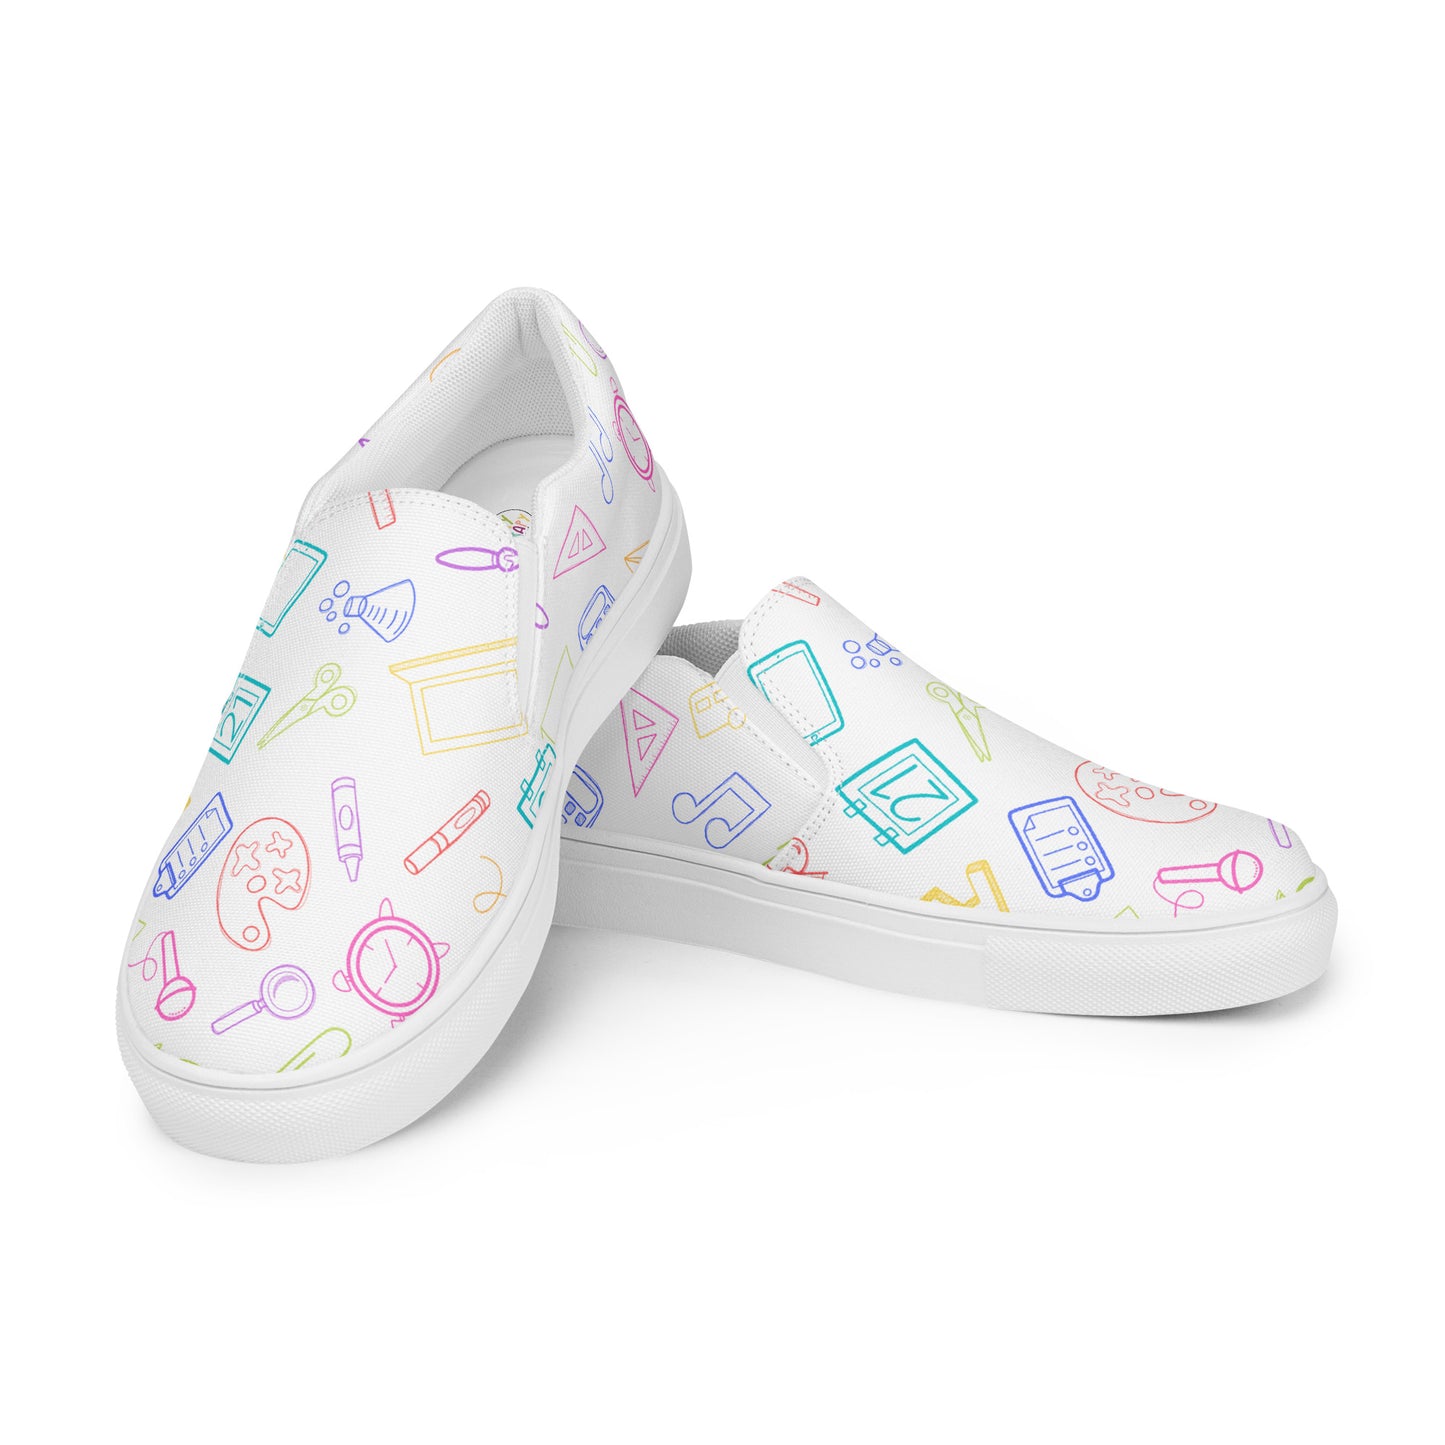 Bright Rainbow on White Elementary Doodles Slip-on Canvas Shoes (Women's Sizes)